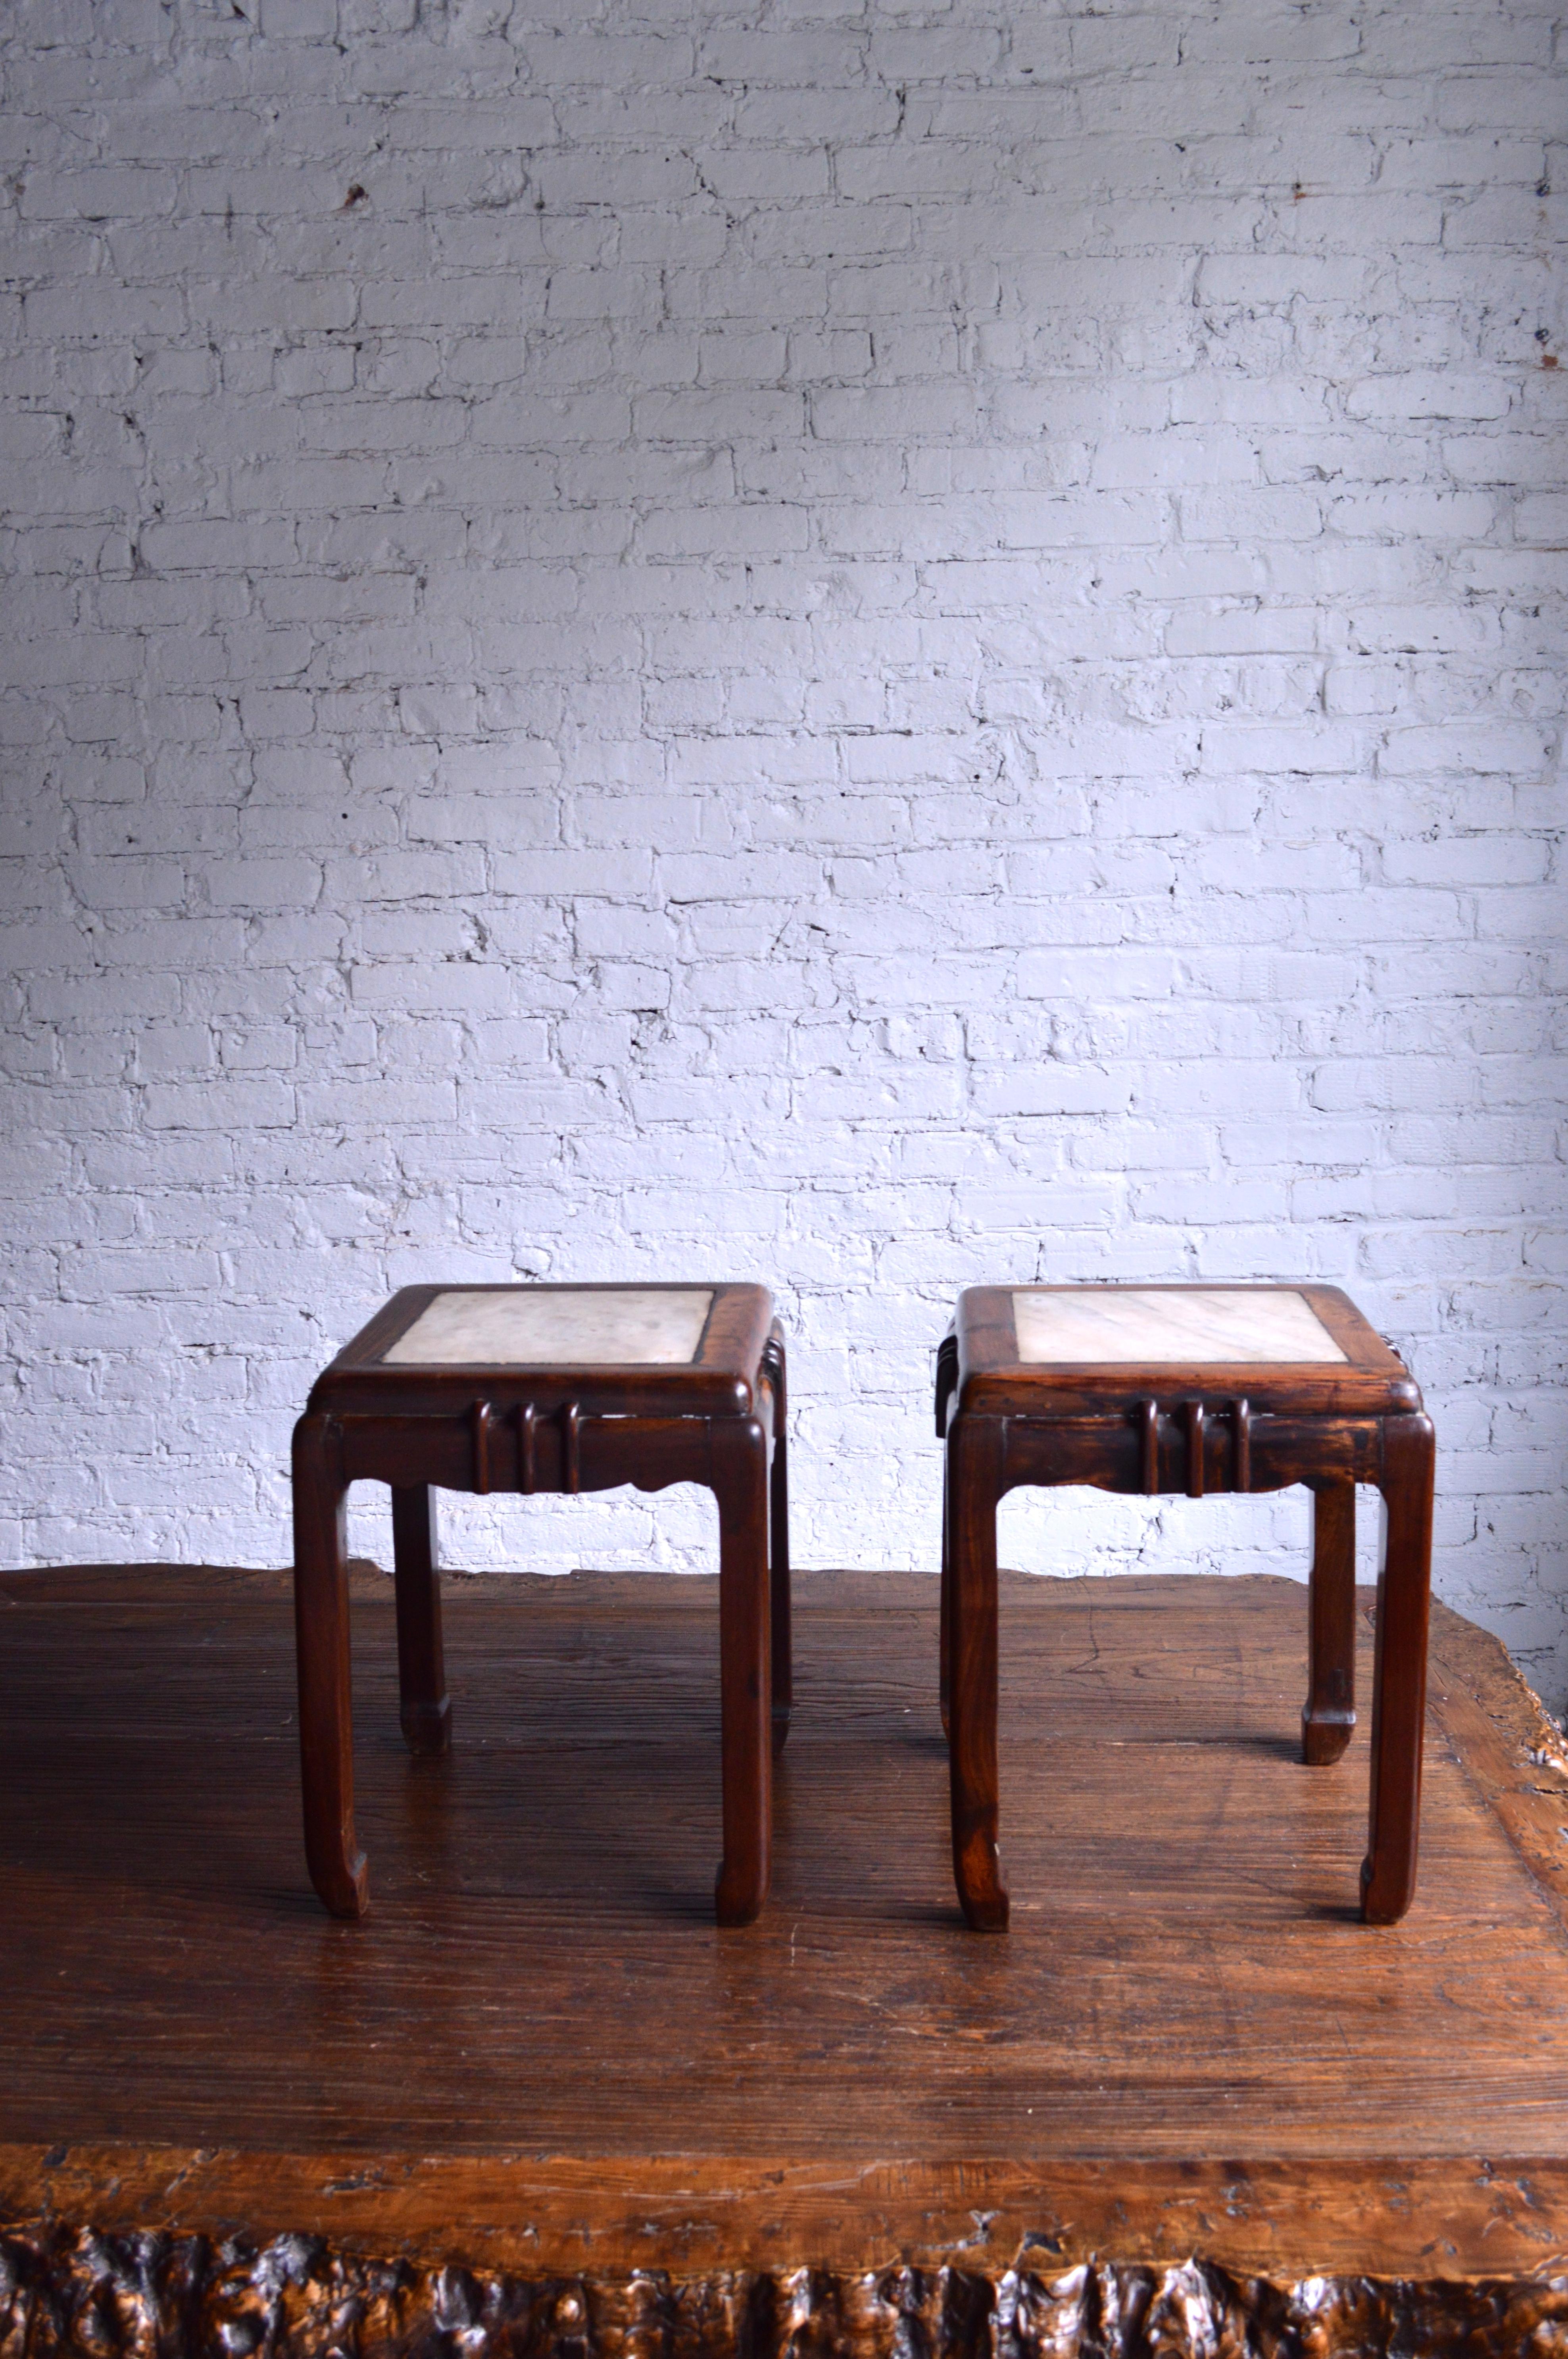 20th century Huali and marble stools. These are Chinese Art Deco, from Shanghai in the 1920s. Their original use would have been as stools around a games table.

Huali is a Chinese rosewood.